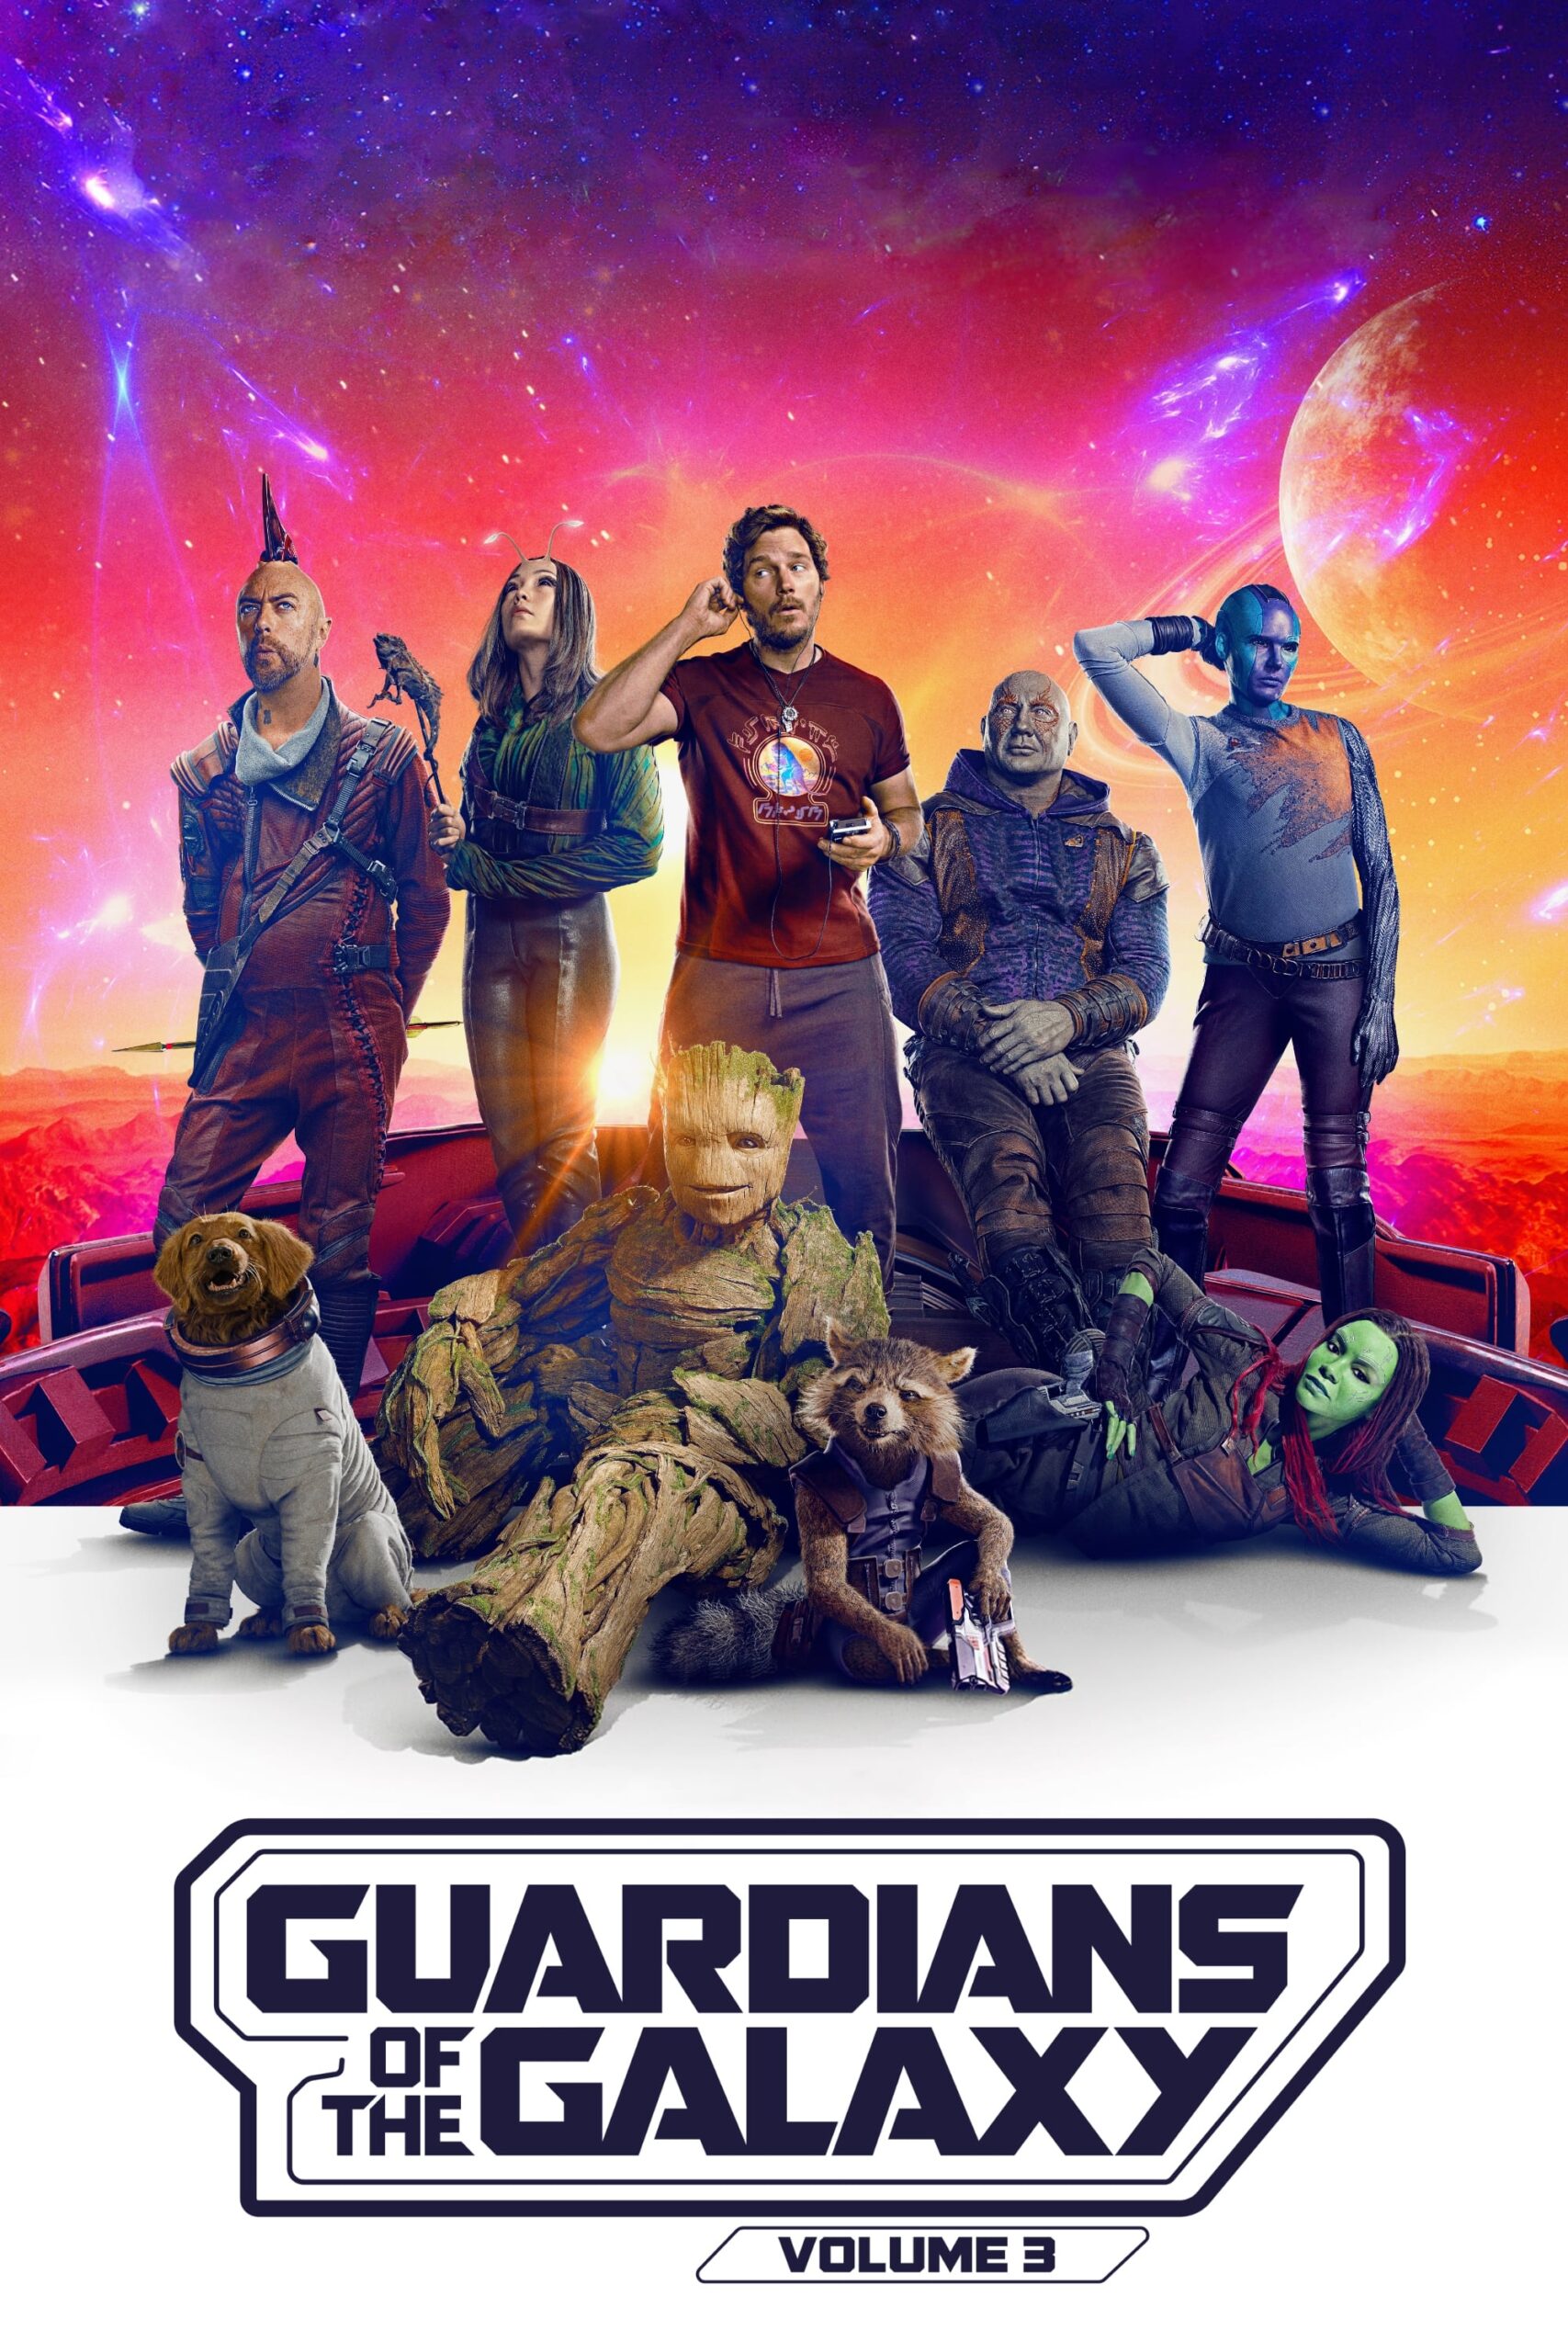 Download Guardians of the Galaxy Vol. 3 (2023) (Dual Audio) Movie In 480p, 720p & 1080p